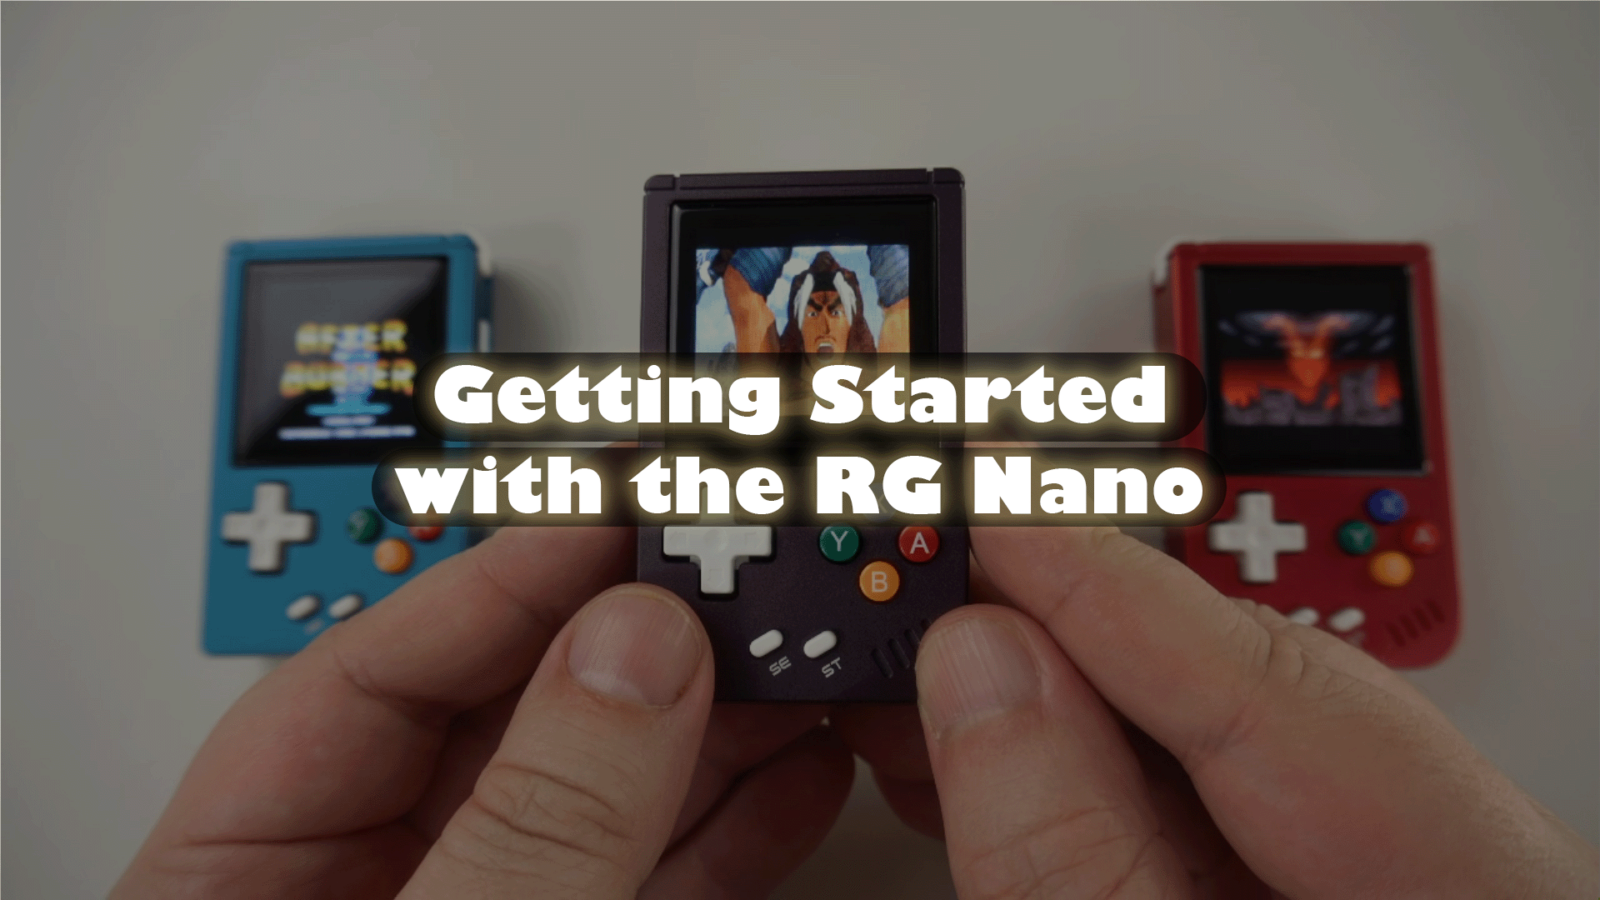 How to add new games and ROMS to your gaming handheld • DroiX